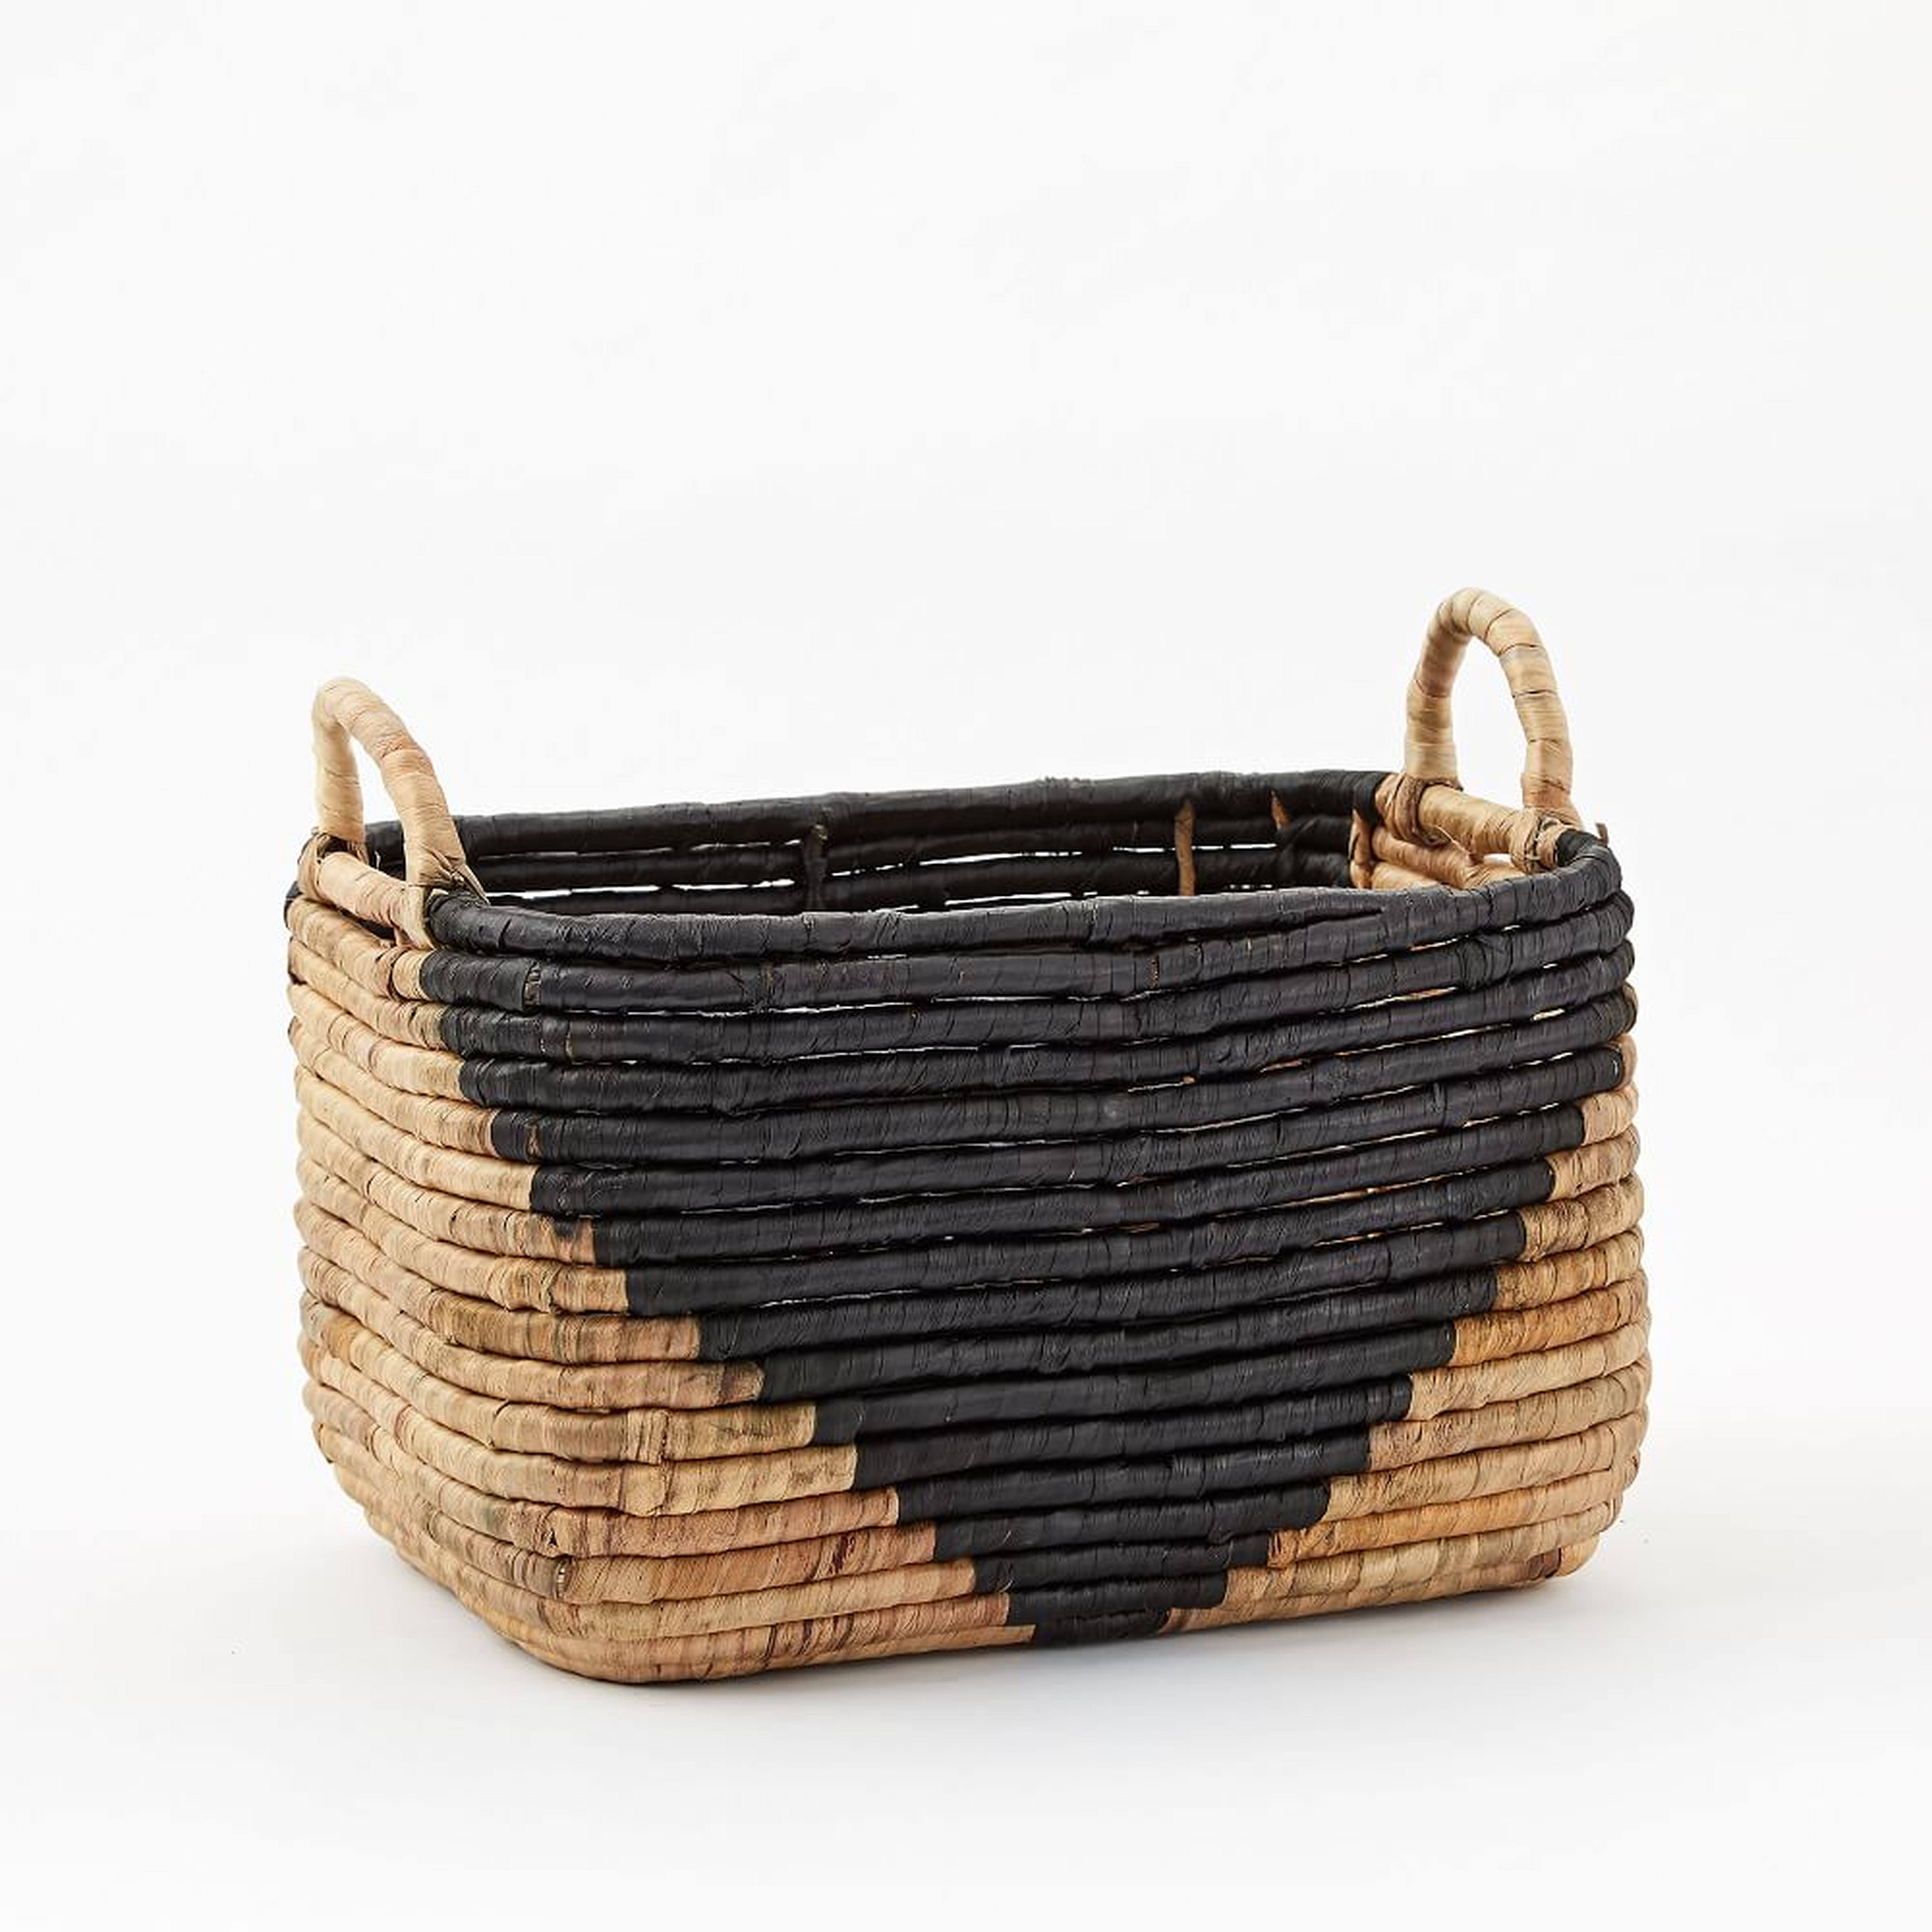 Two-Tone Woven Seagrass, Handle Baskets, Medium, 16"W x 12.5"D x 10.5"H - West Elm